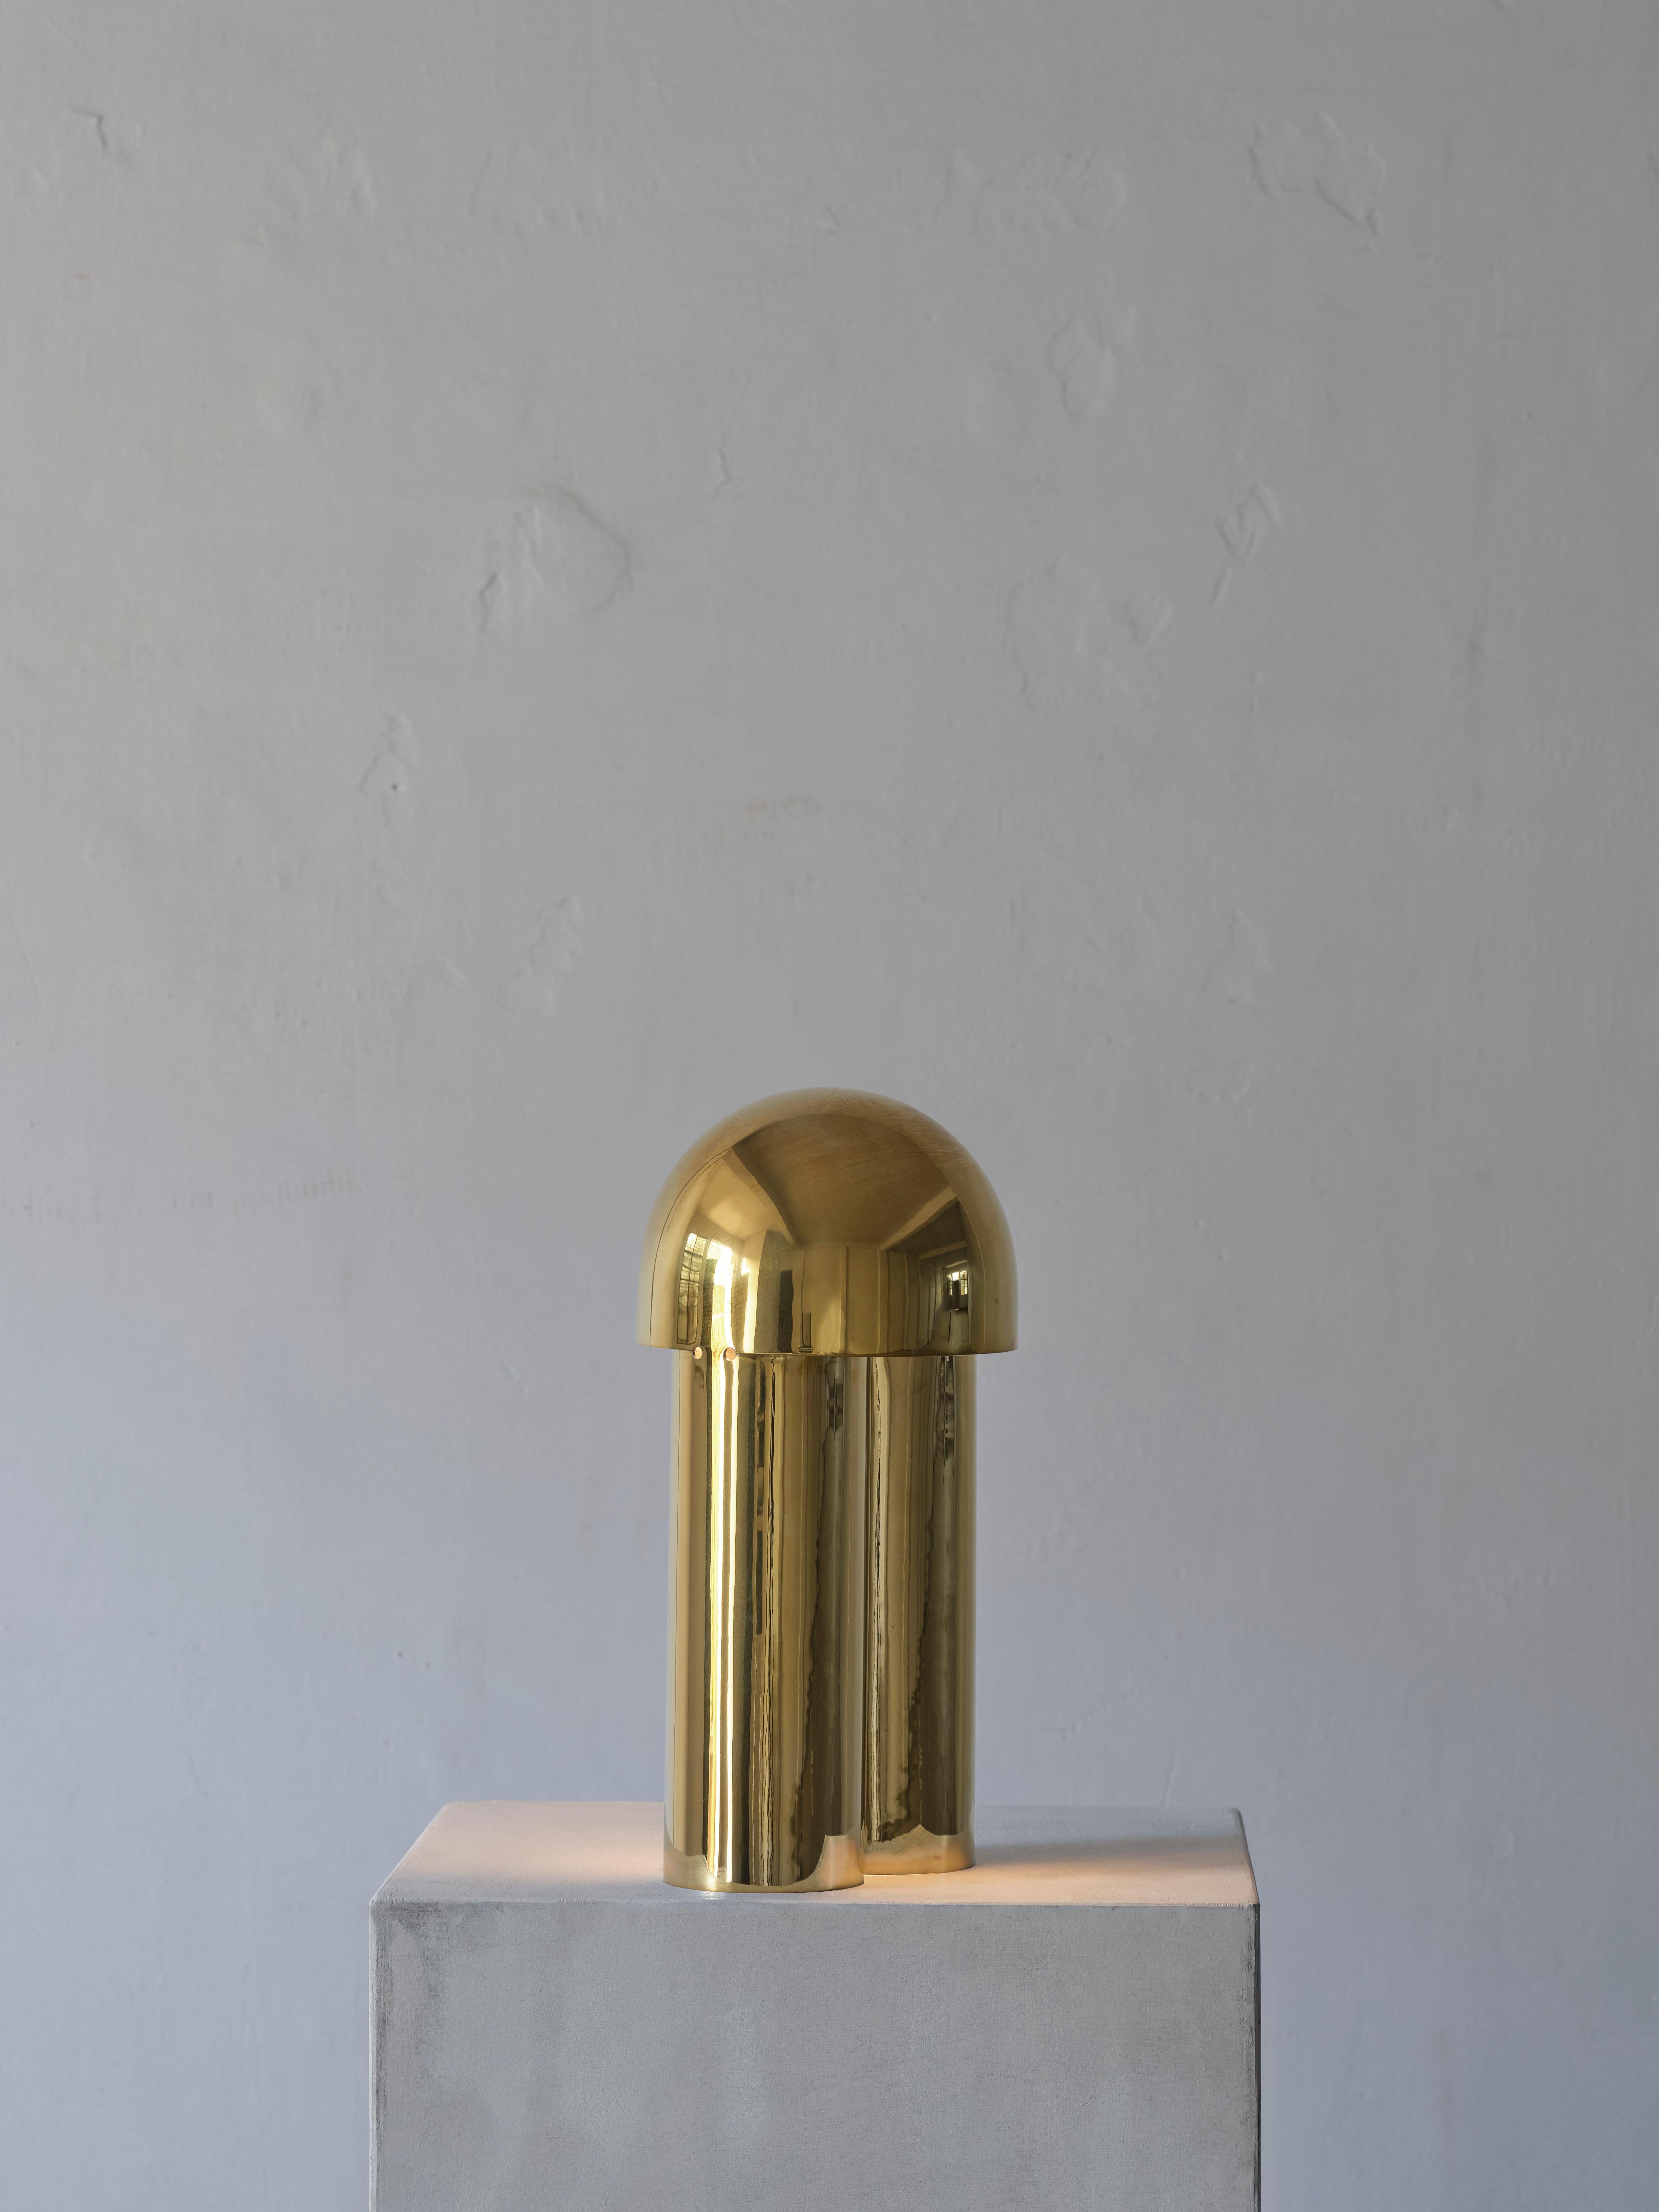 Monolith buffed brass sculpted table lamp by Paul Matter
Dimensions: H 419 mm x D 203.2 mm
Weight: 3 Kgs
Lamping: 1 type E14 base, 3W - 5W led, warm white
CE certified, voltage 220V - 240V
Dimmable upon request
Materials: Brass

Custom